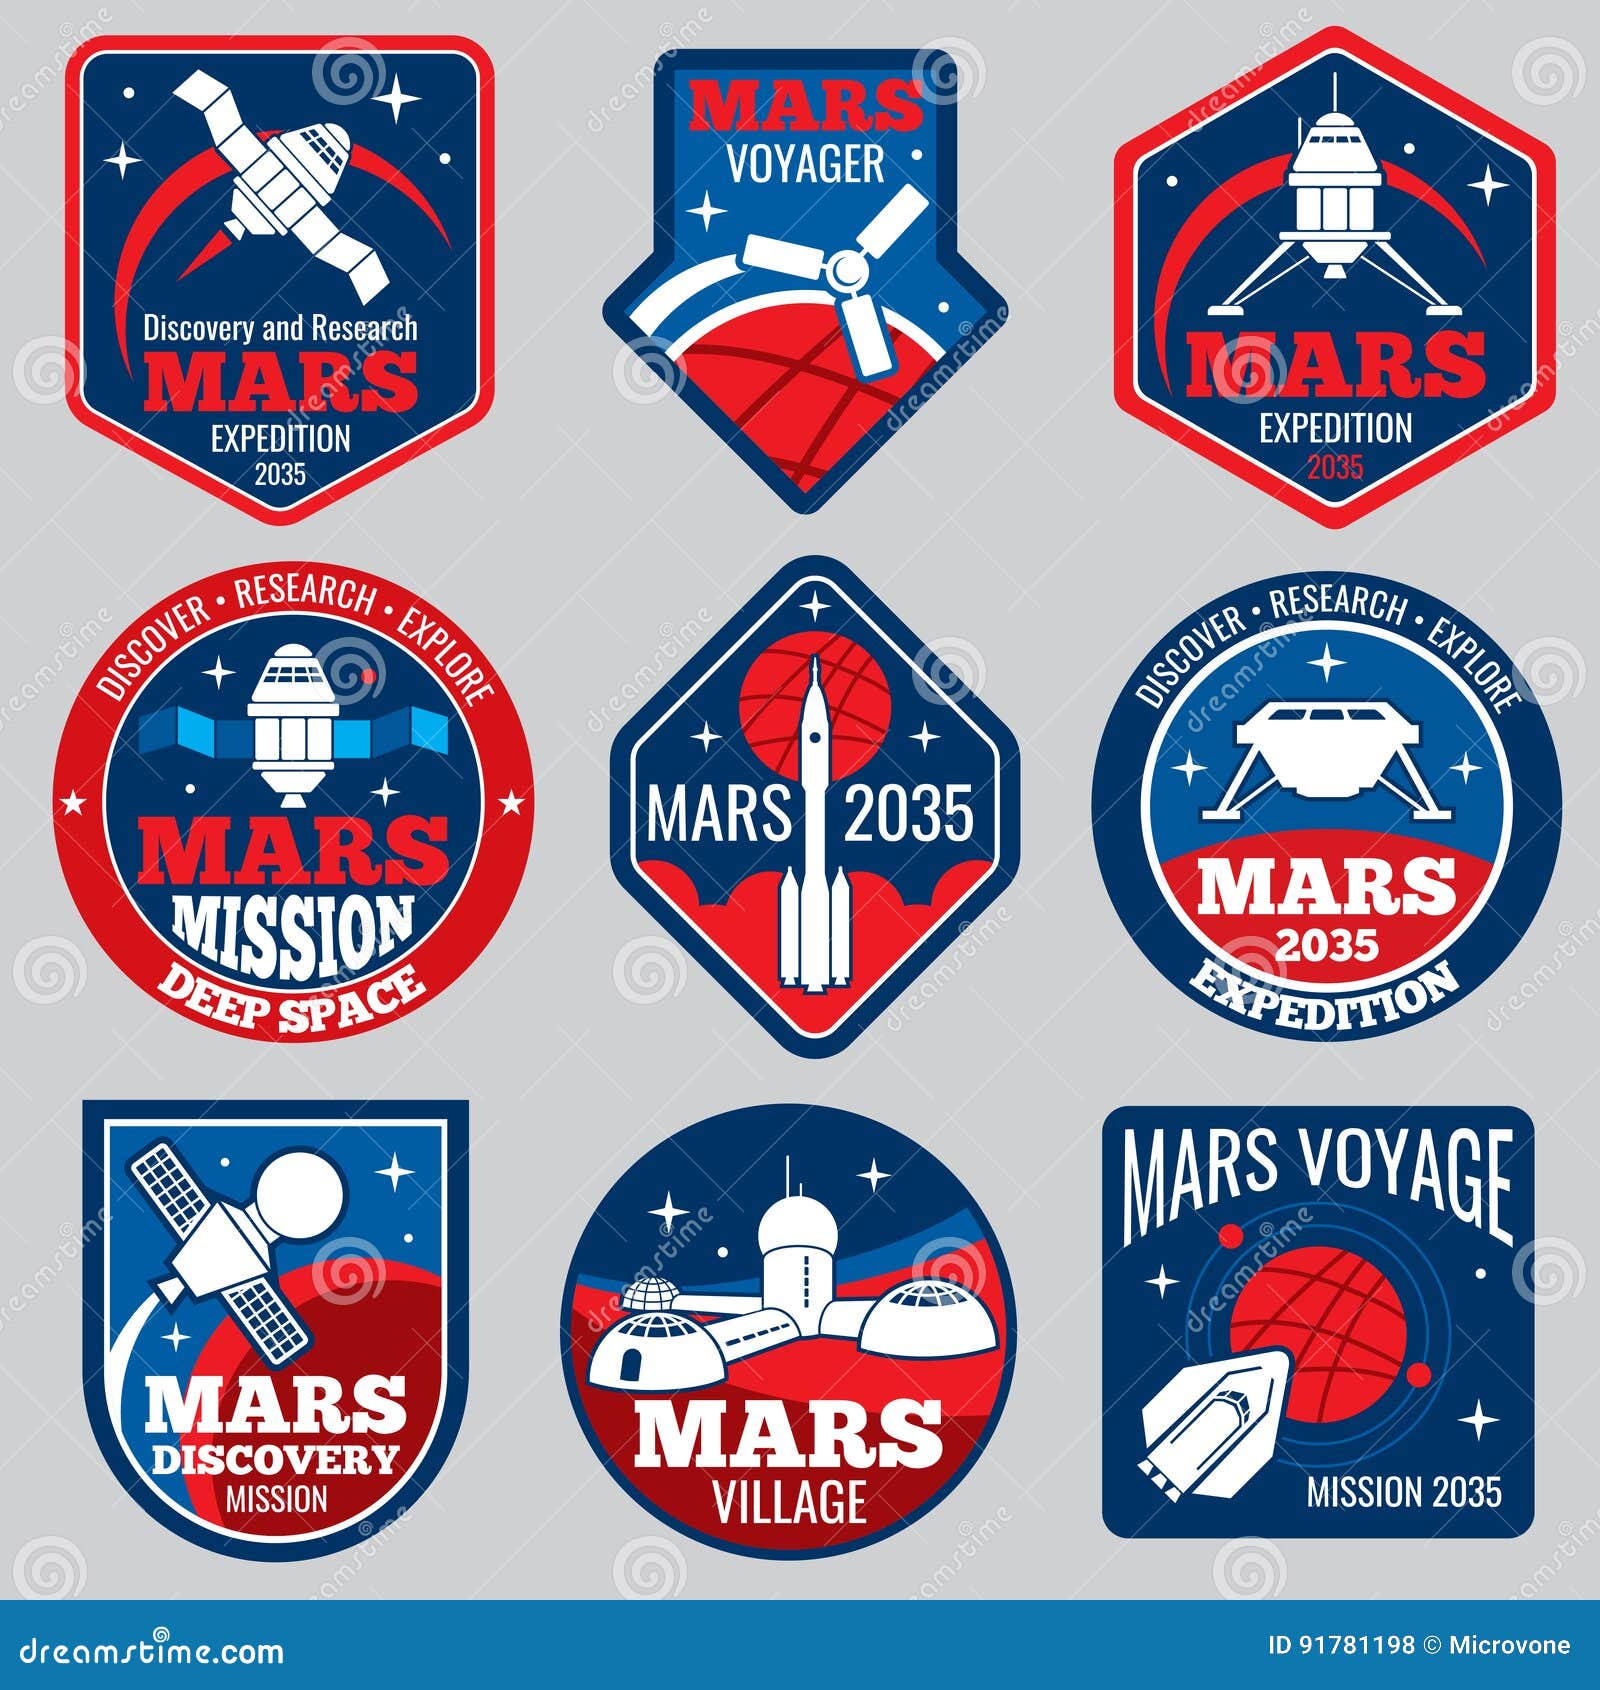 mars colonization  retro space logos and labels set